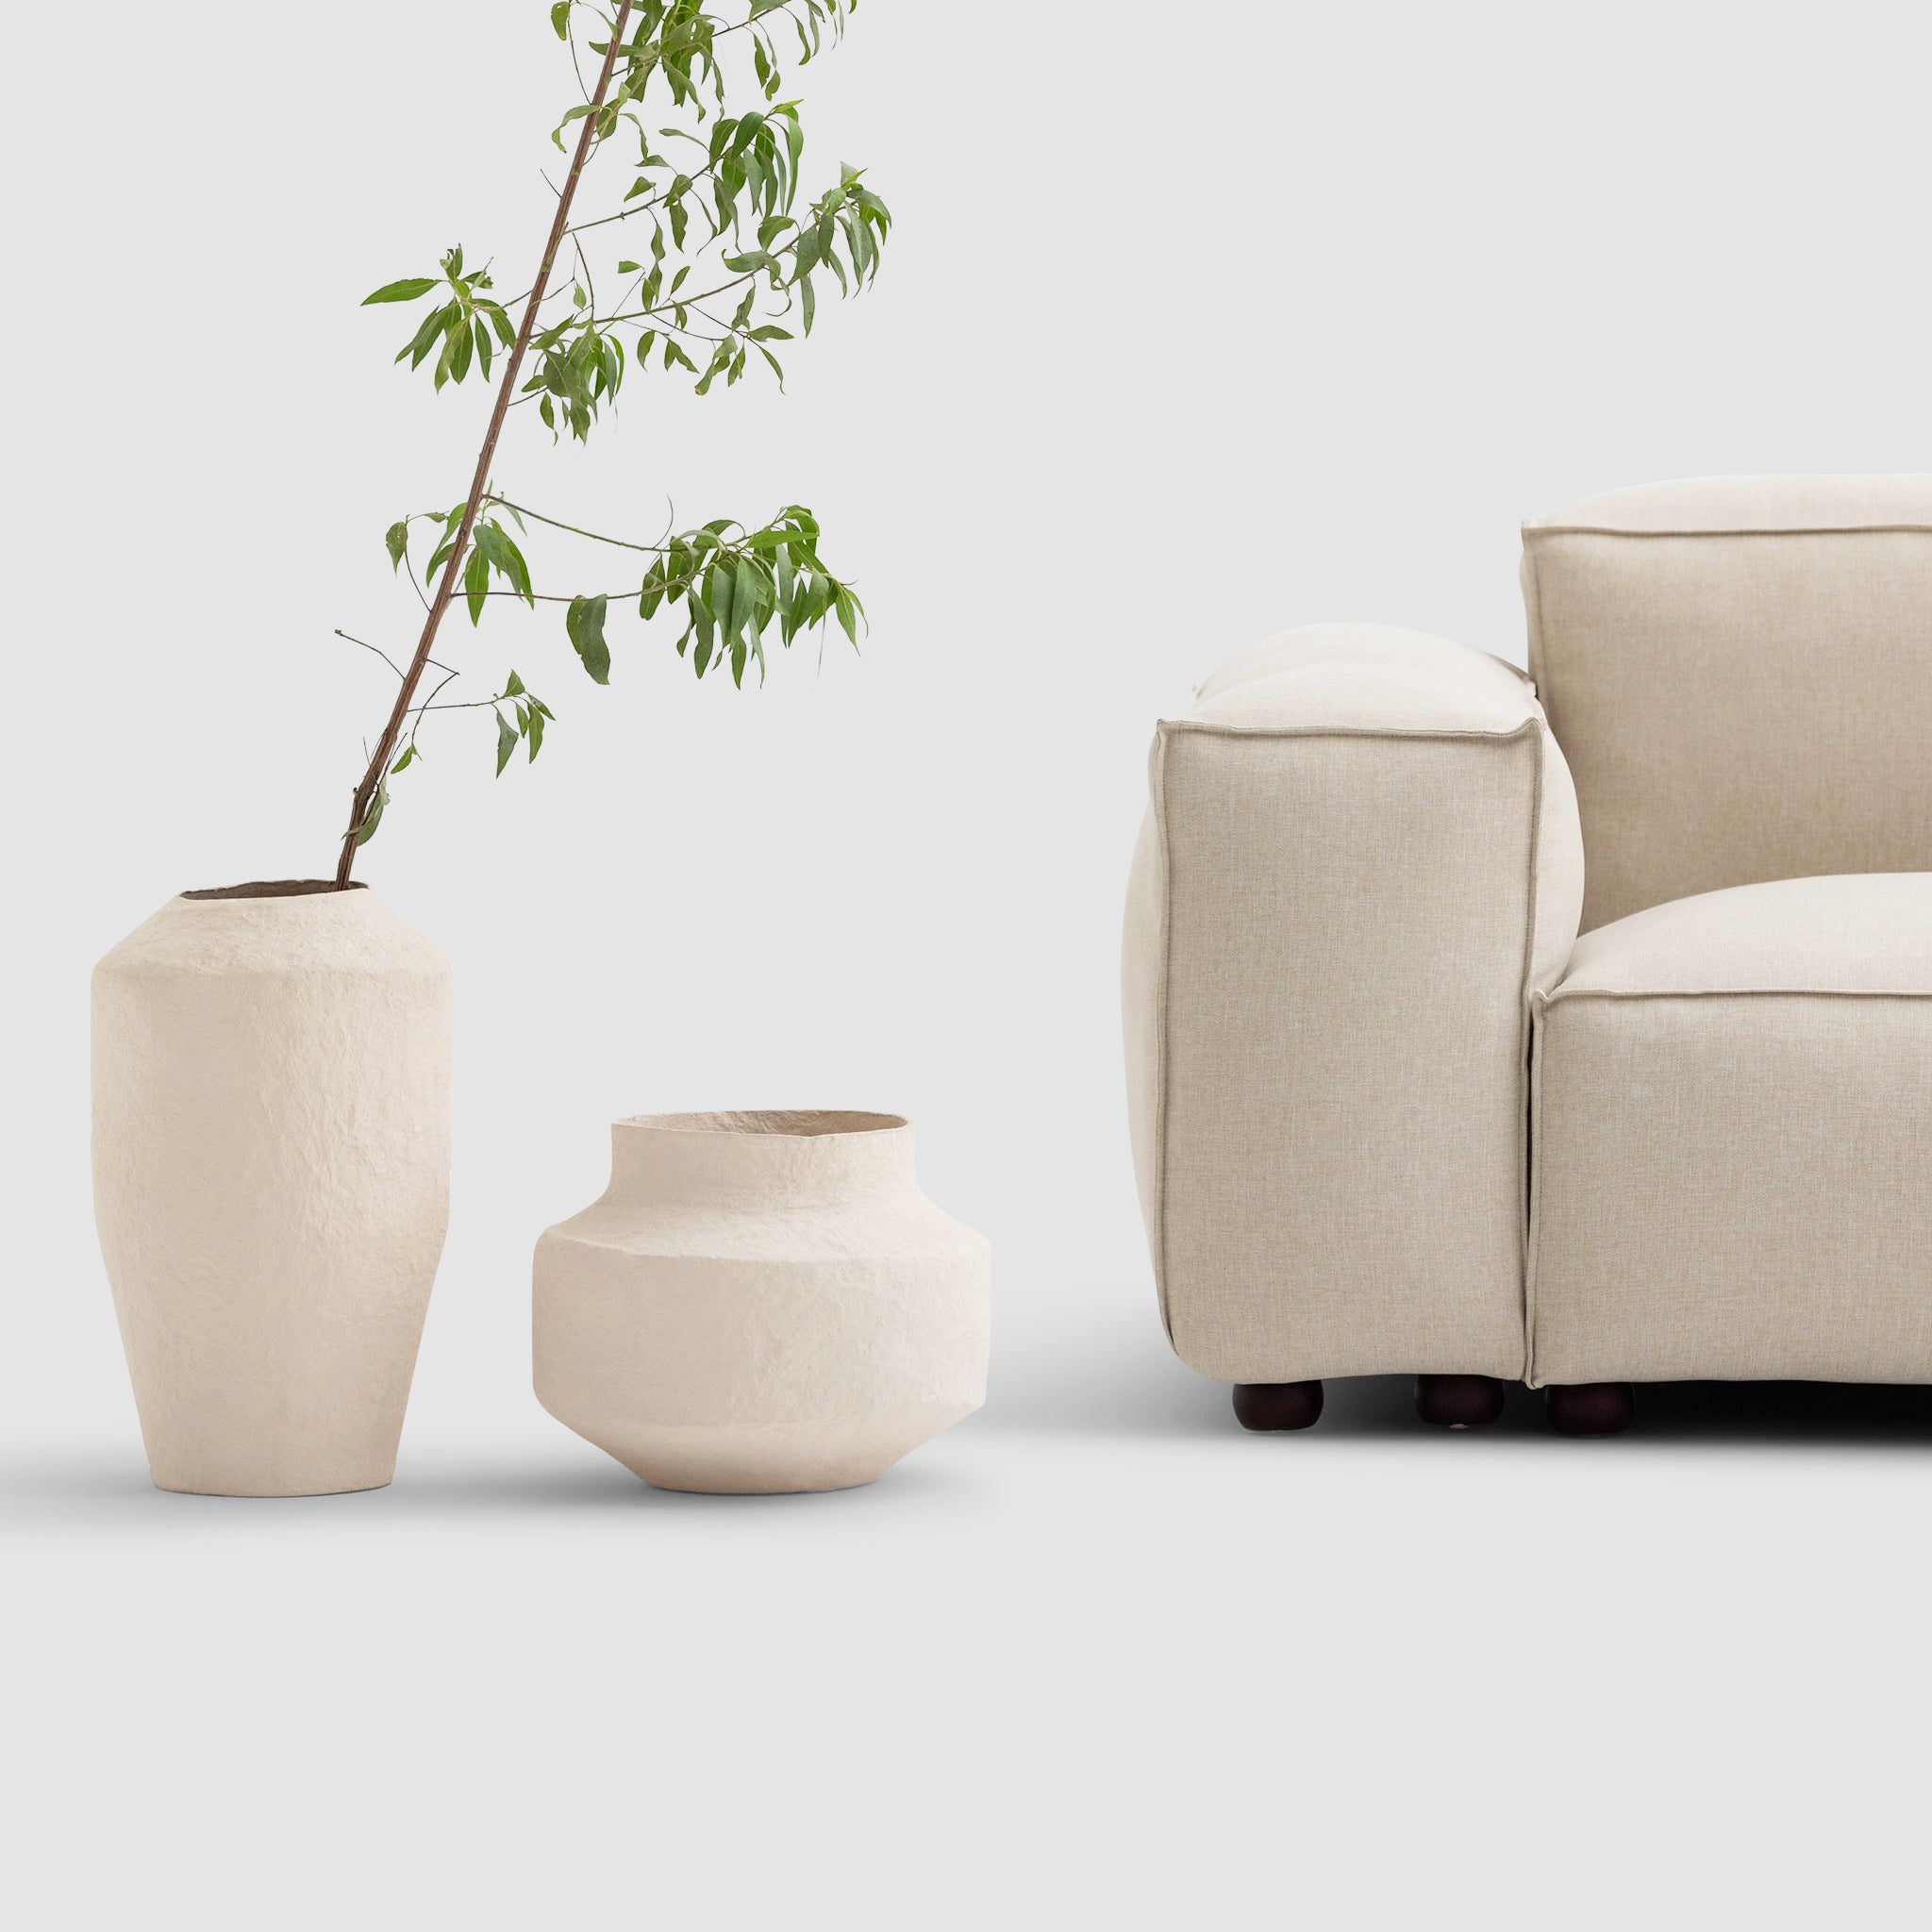 A detailed view of a beige sofa's armrest on the right, accompanied by two textured beige vases on the left. One vase is tall with a leafy branch, while the other is shorter and wider, both set against a light grey background.